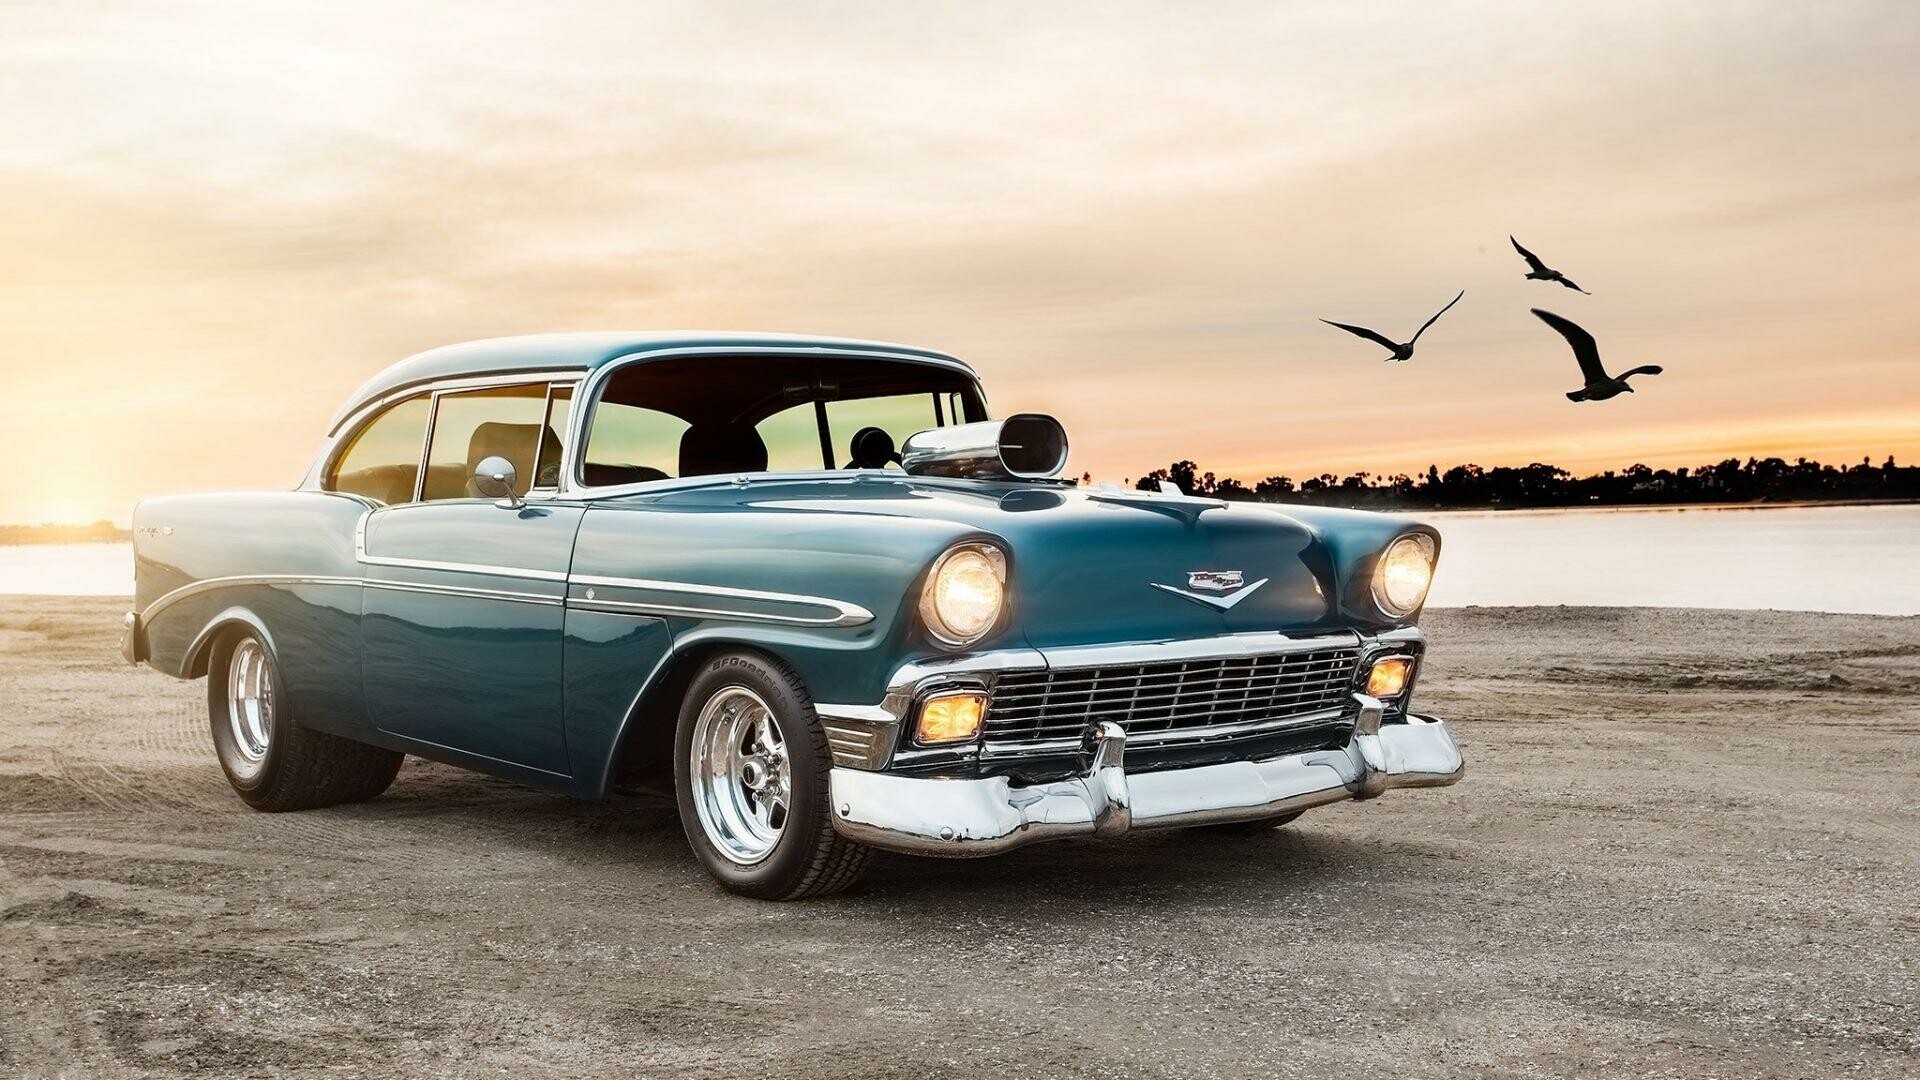 Chevrolet: The Chevy Bel Air, especially its third generation design, has been considered an icon of the 1950s, Vintage cars. 1920x1080 Full HD Background.